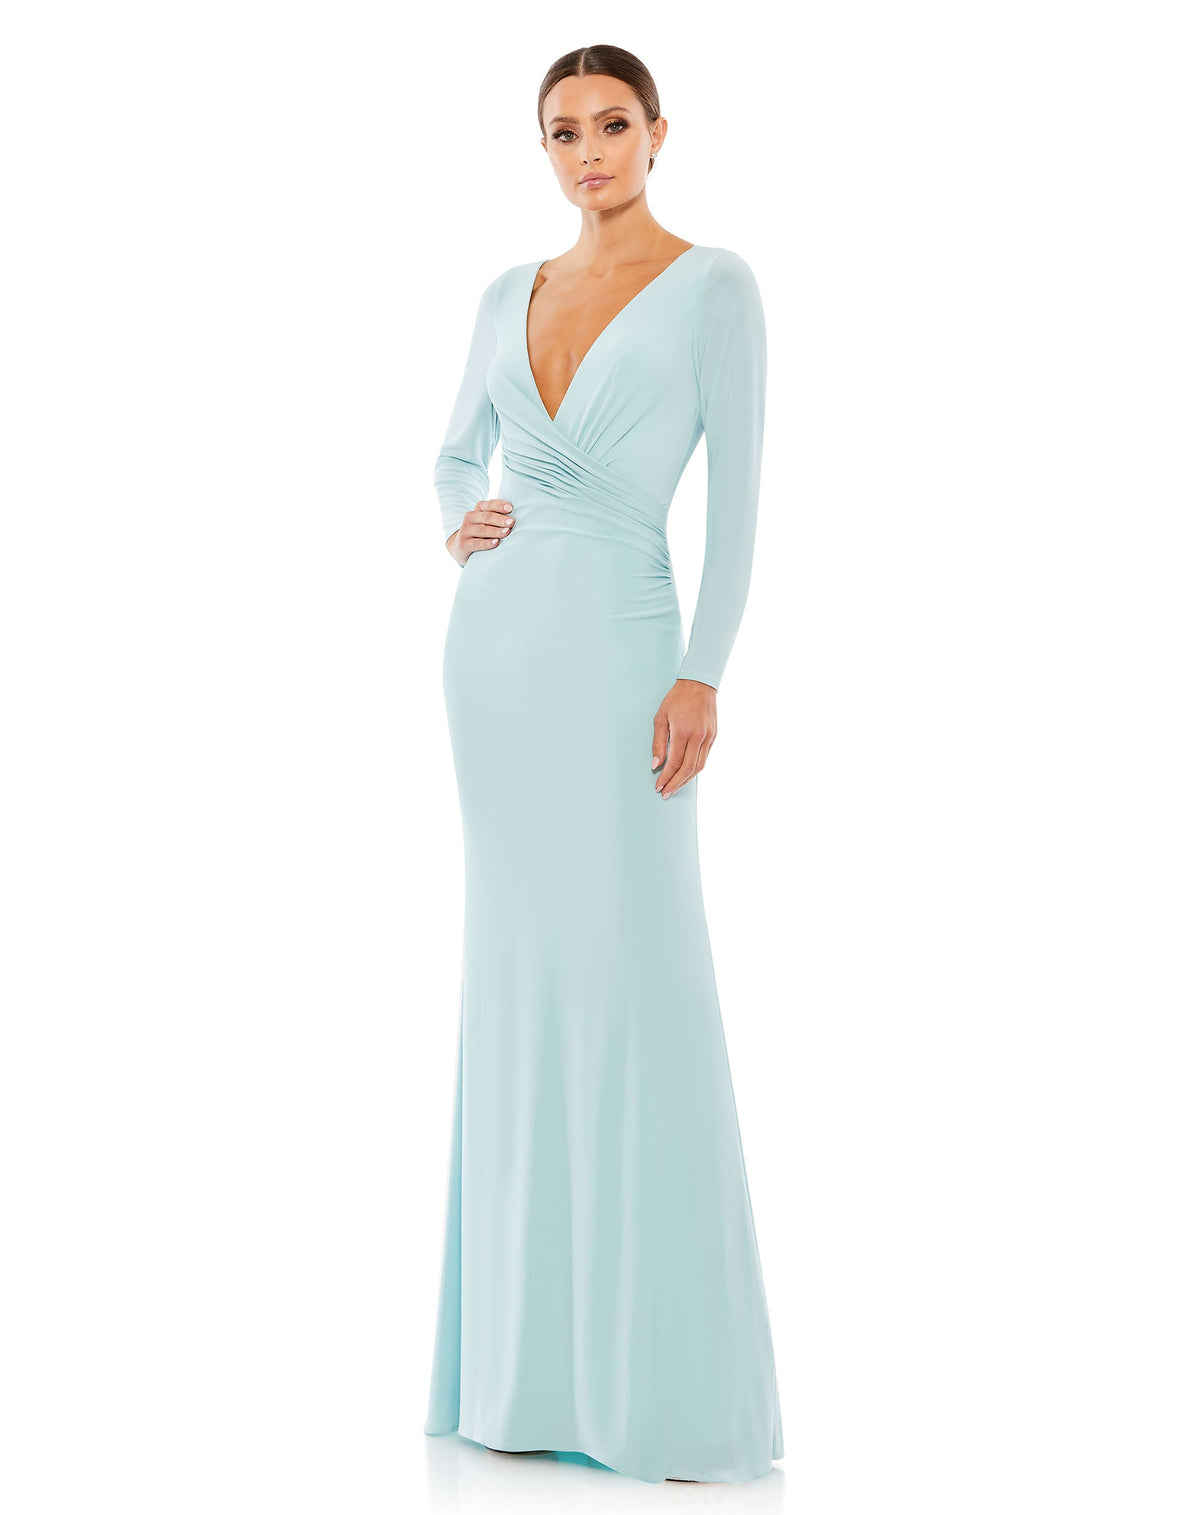 This elegant Mac Duggal powder-blue, evening dress is a beautiful, long, simple and sleek, chic jersey gown. Cut with a curve-hugging fit, the dress is fashioned with a deep surplice neckline, long sleeves and pleating at the waist. This gown is perfect for proms, black-tie affairs, weddings and special events!